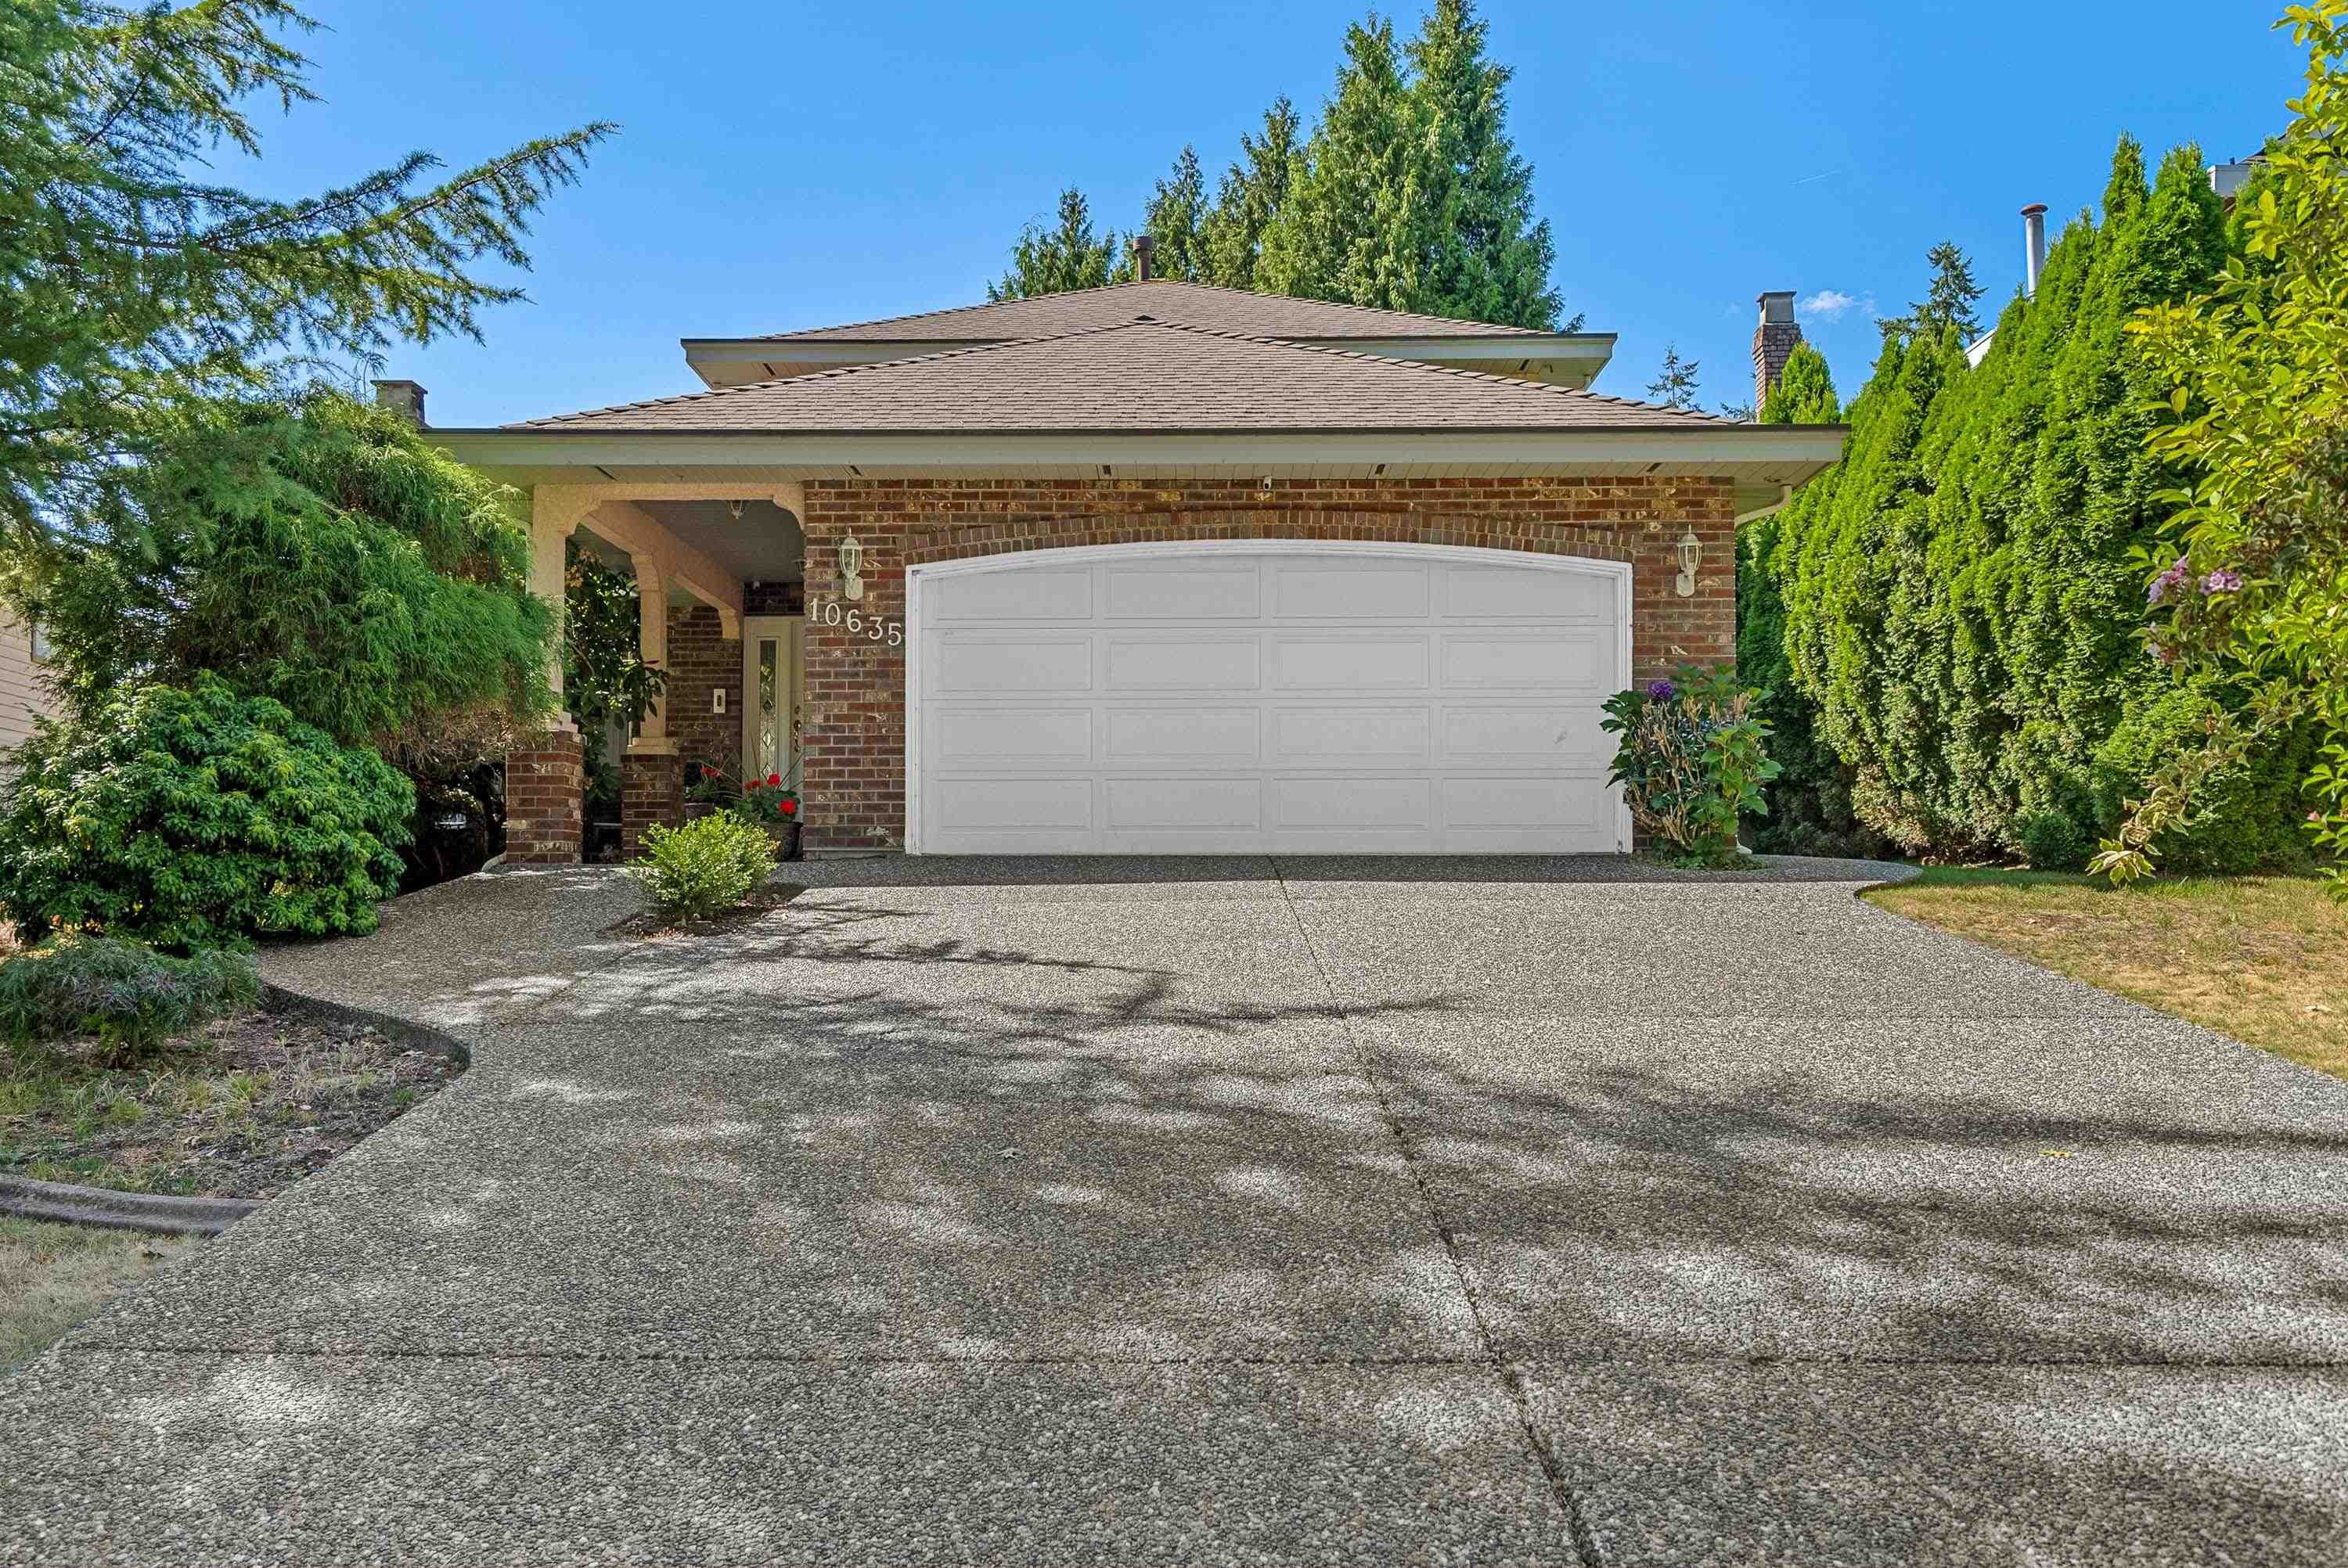 We have sold a property at 10635 GLENWOOD CRES E in Surrey